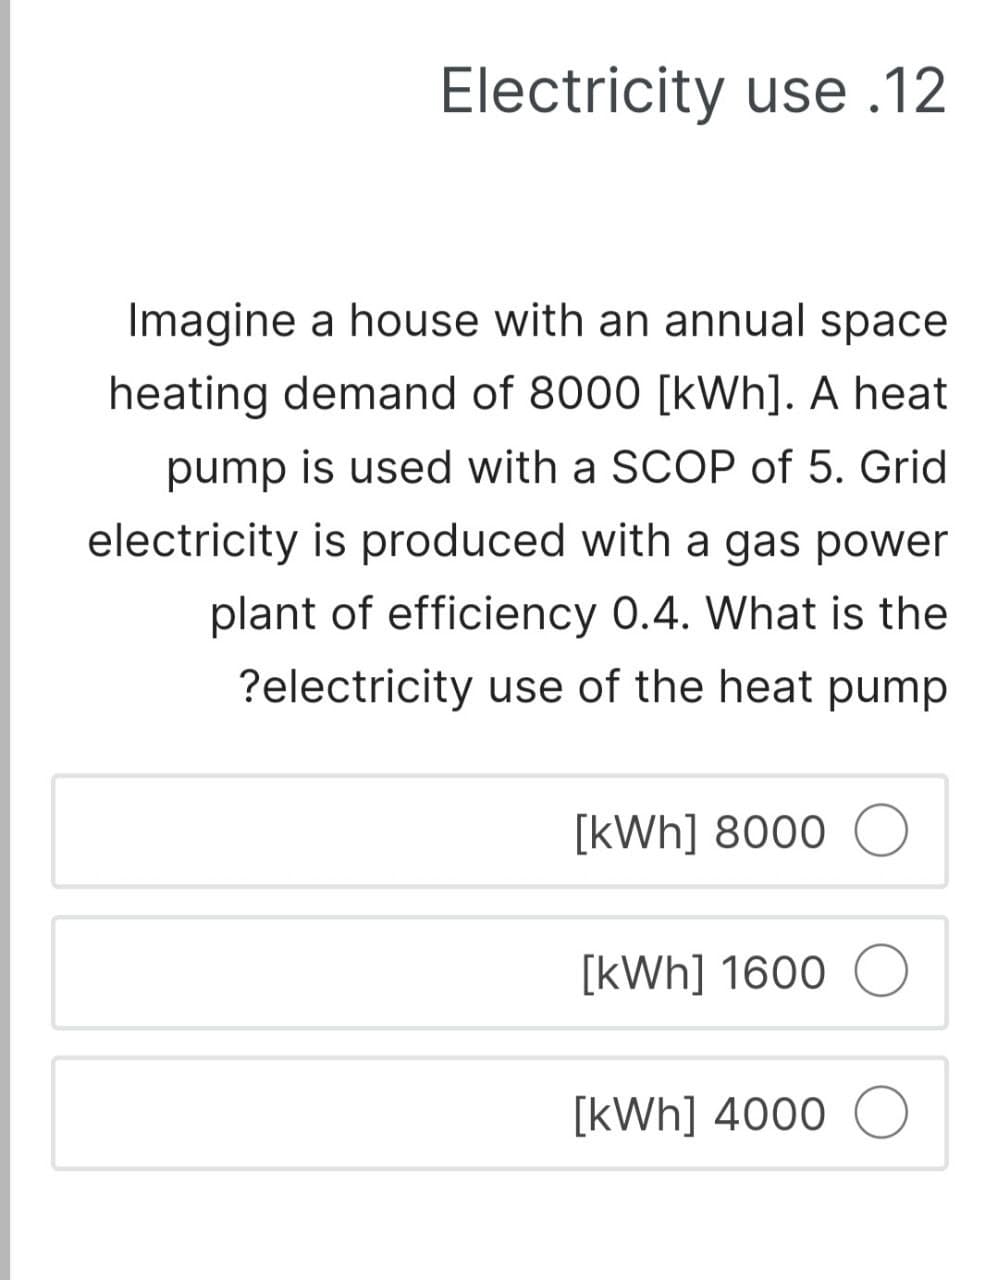 Electricity use .12
Imagine a house with an annual space
heating demand of 8000 [kWh]. A heat
pump is used with a SCOP of 5. Grid
electricity is produced with a gas power
plant of efficiency 0.4. What is the
?electricity use of the heat pump
[kWh] 8000
[kWh] 1600
[kWh] 4000